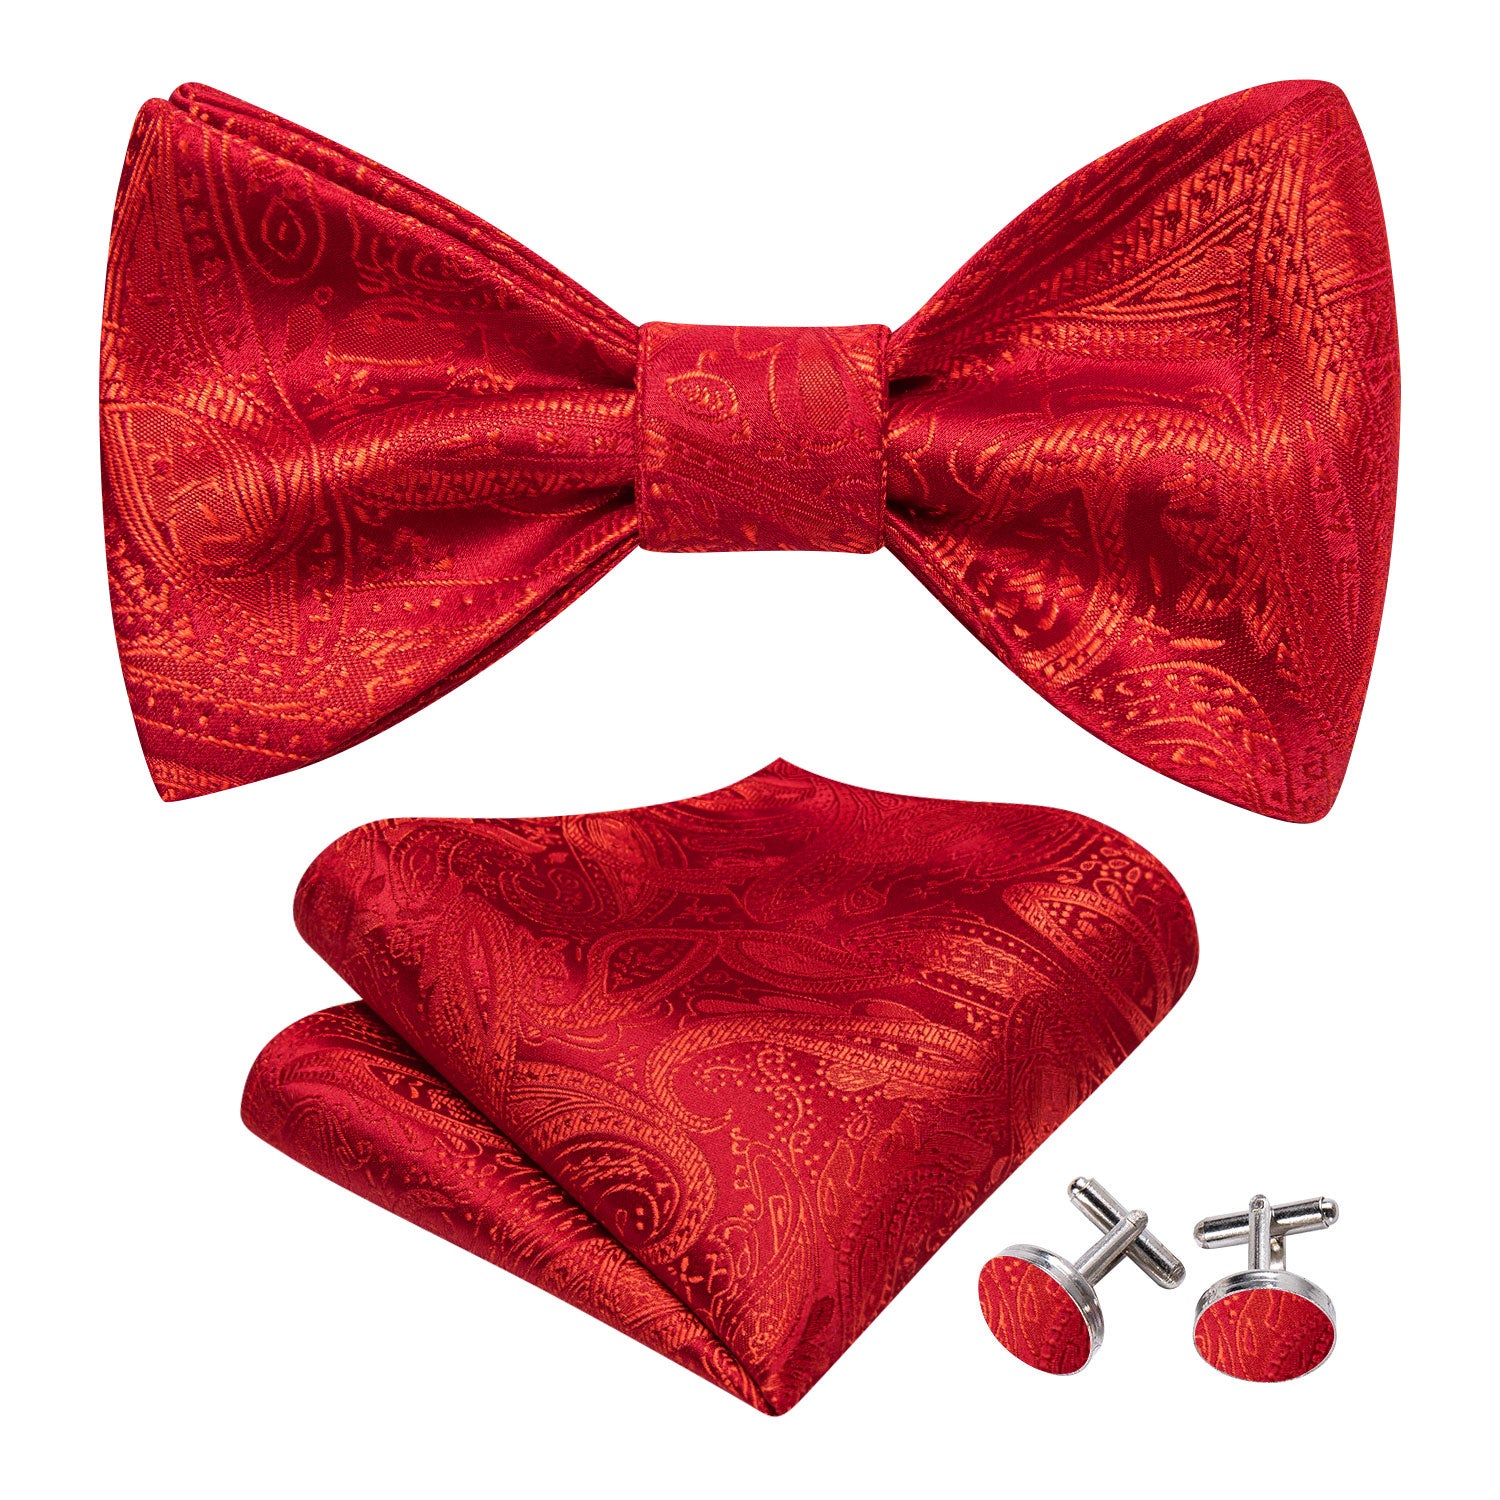 Strong Red Paisley Silk Bow Tie Hanky Cufflinks Set